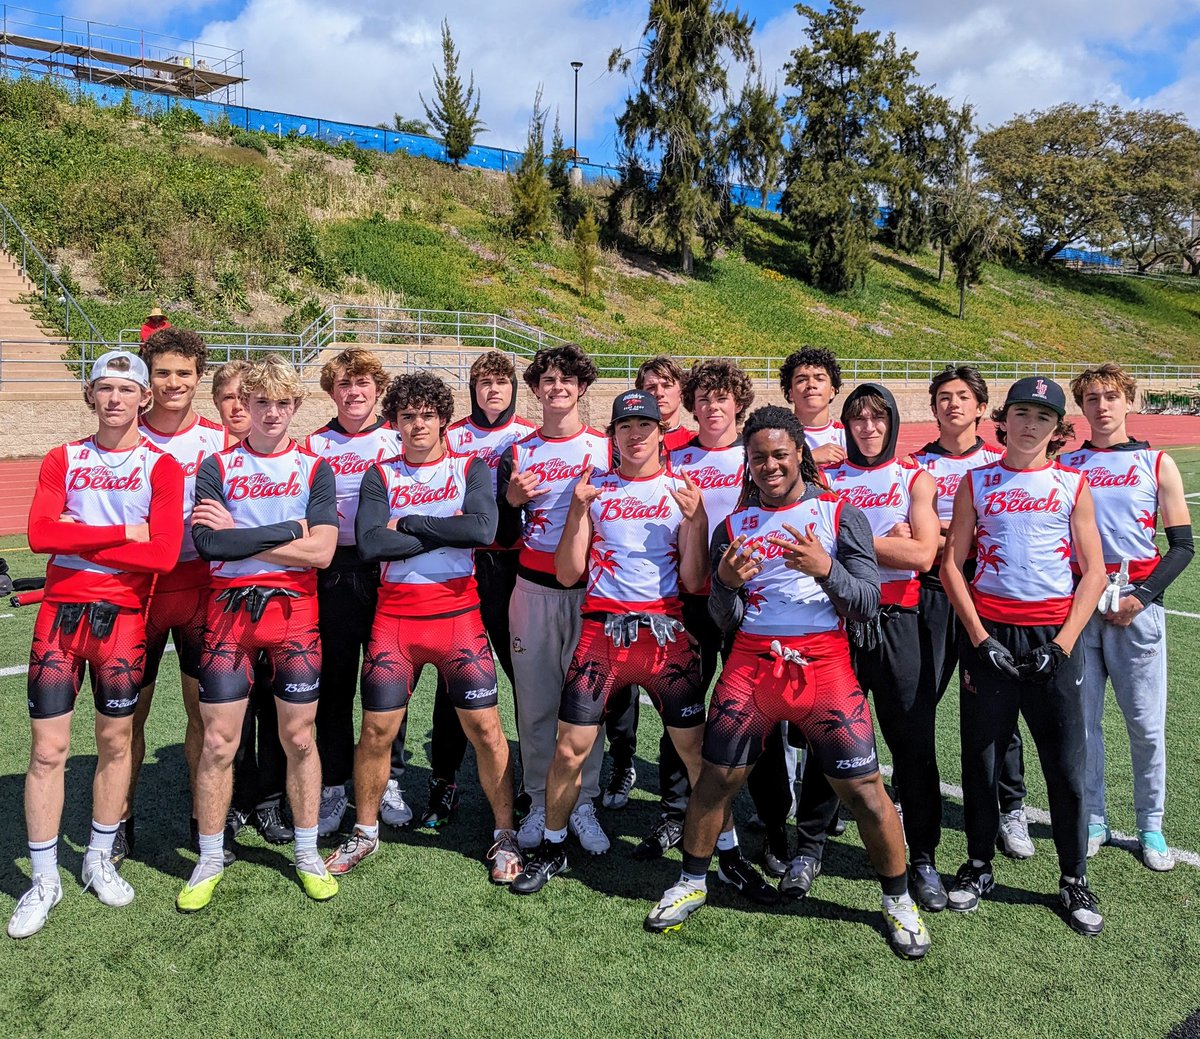 Sunday Funday 7's with the Boys @LJHSVIKINGFB Lookin' Good and Playin' Good in the New @gamebreakerhg Uni's. Appreciate @SSovacool55 & @LeftCoastAthl for hosting today! #sailtheship #chase24